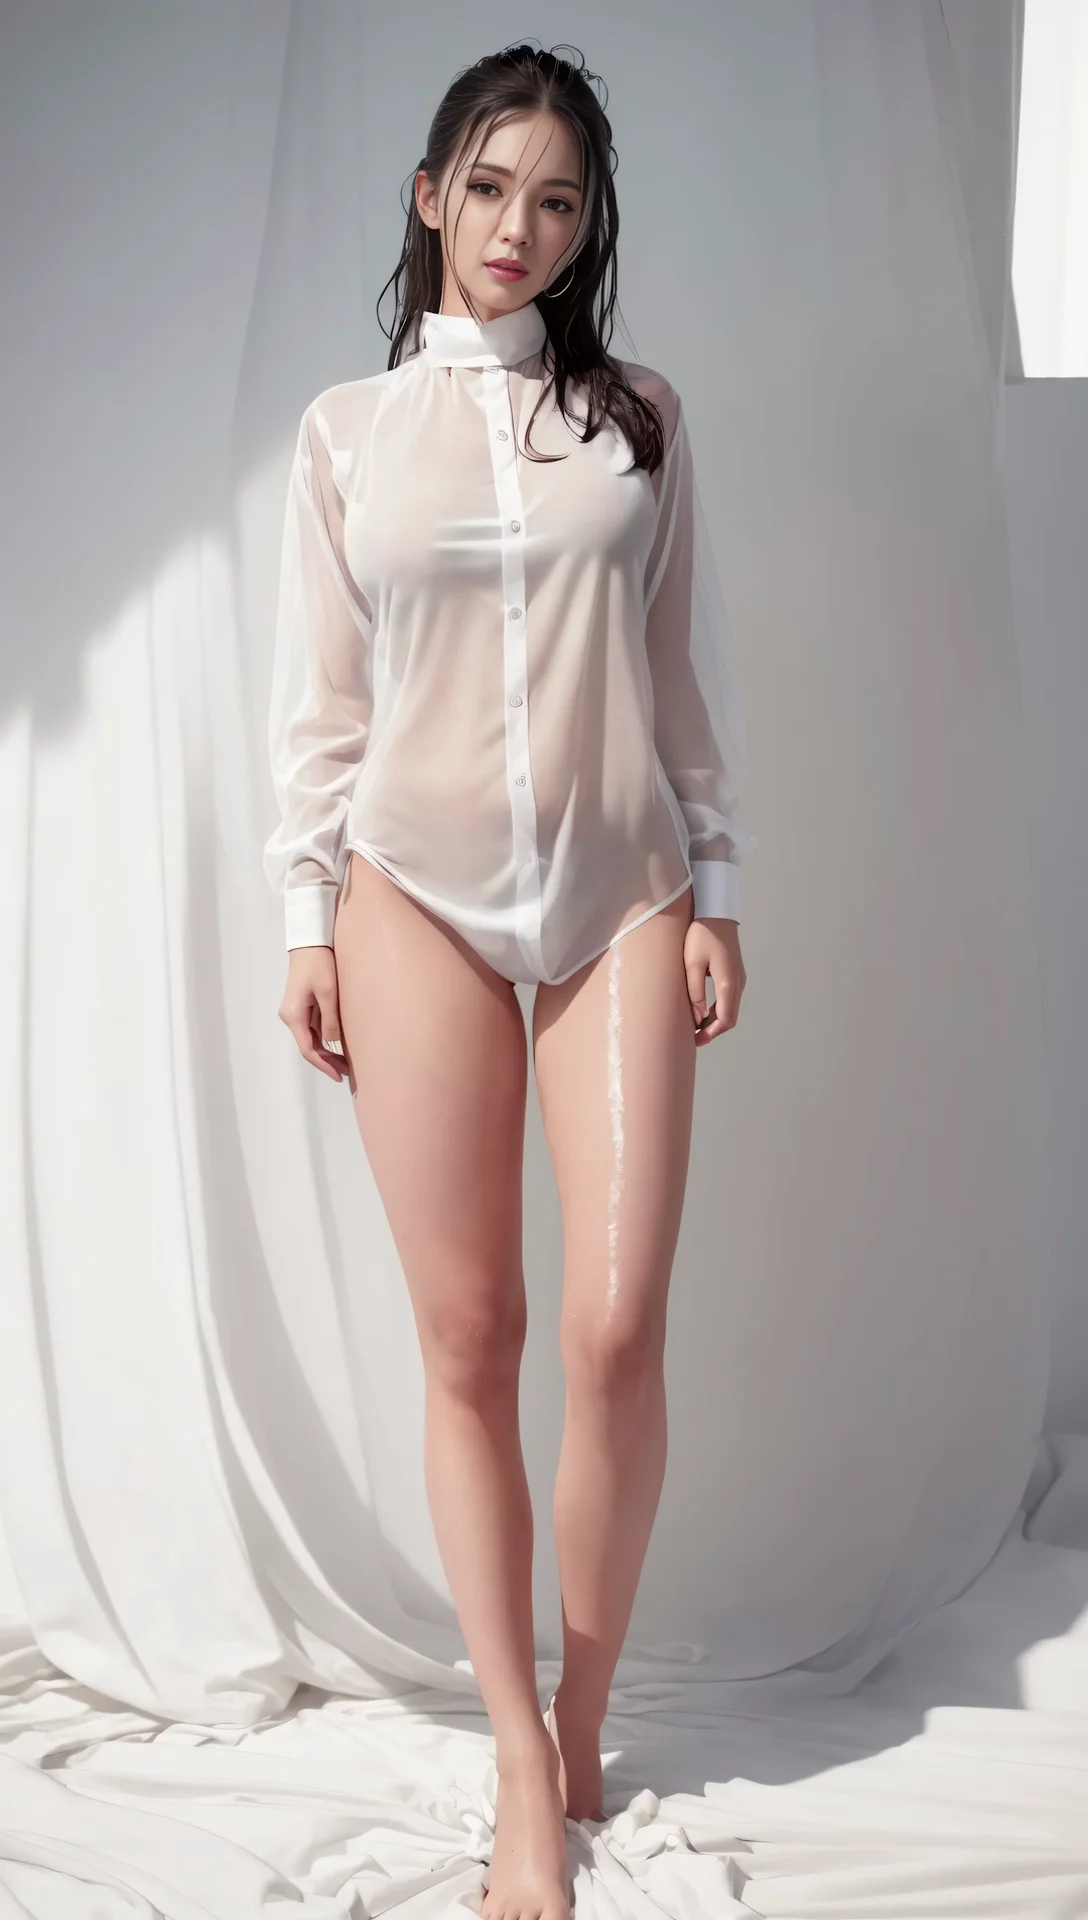 Ai Lookbook Beautiful Girl In A White Shirt And Panties Image 24